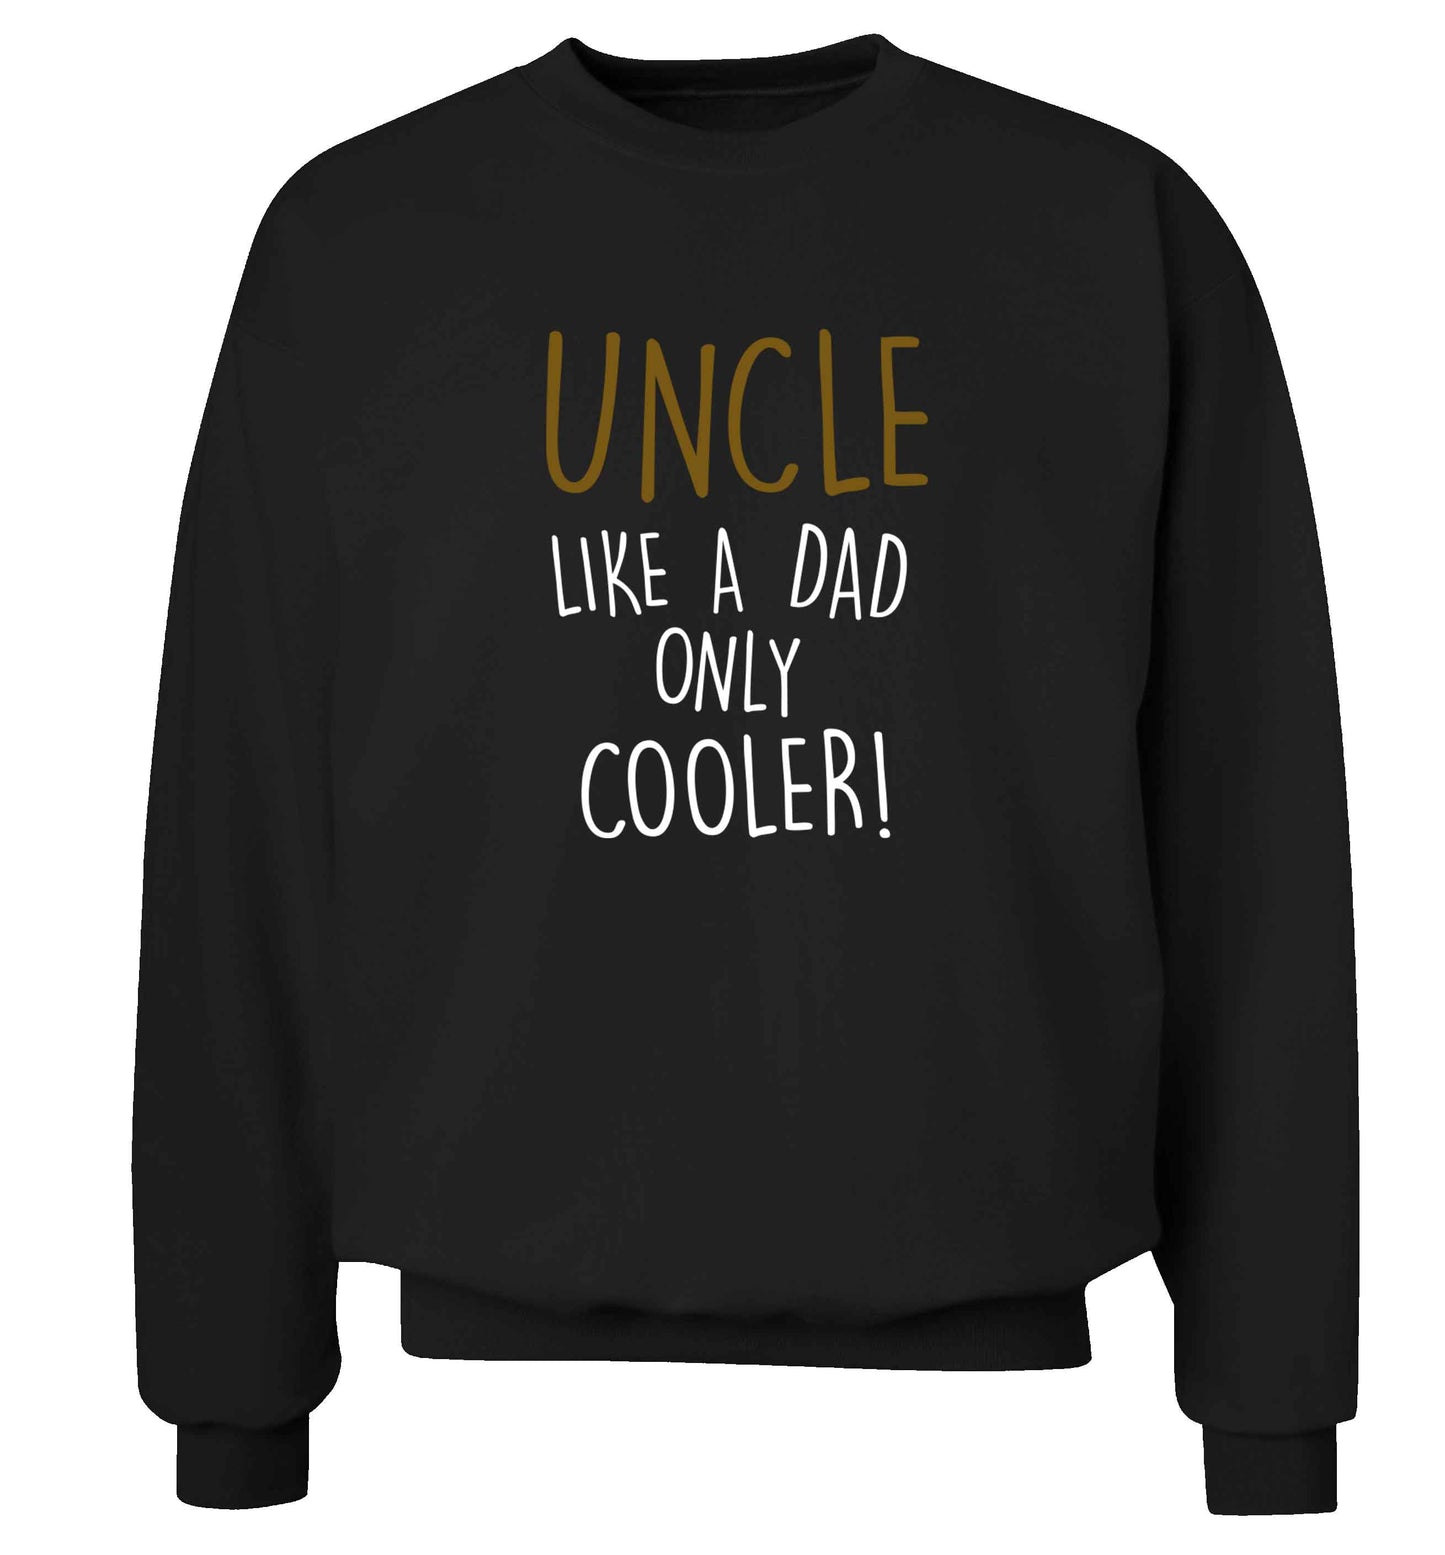 Uncle like a dad only cooler adult's unisex black sweater 2XL